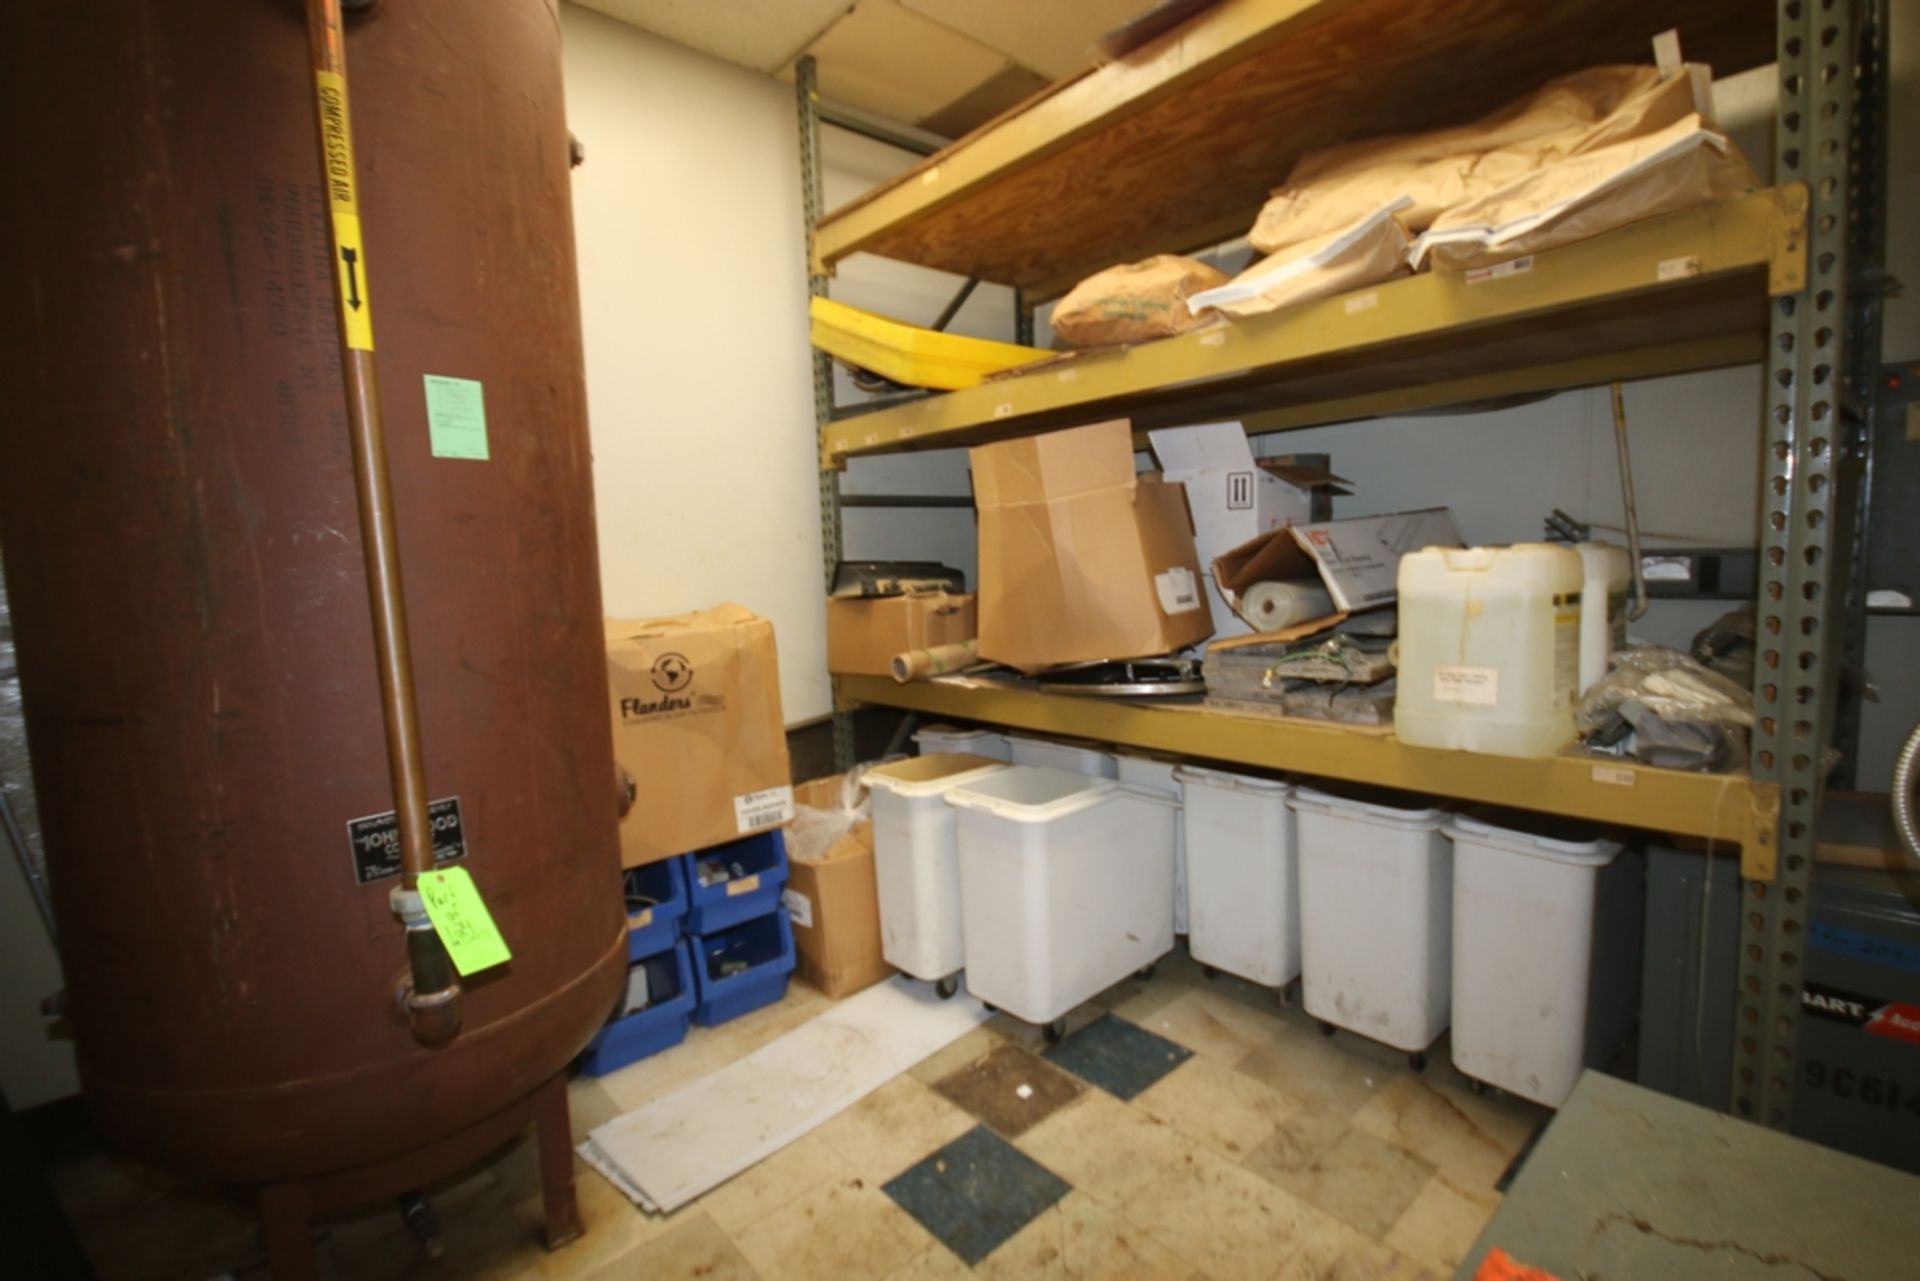 Contents of (2) Rooms, Includeing Table, Shelving, 2-Door Cabinets, Pallet Racking, Drum Dullies, - Image 3 of 3